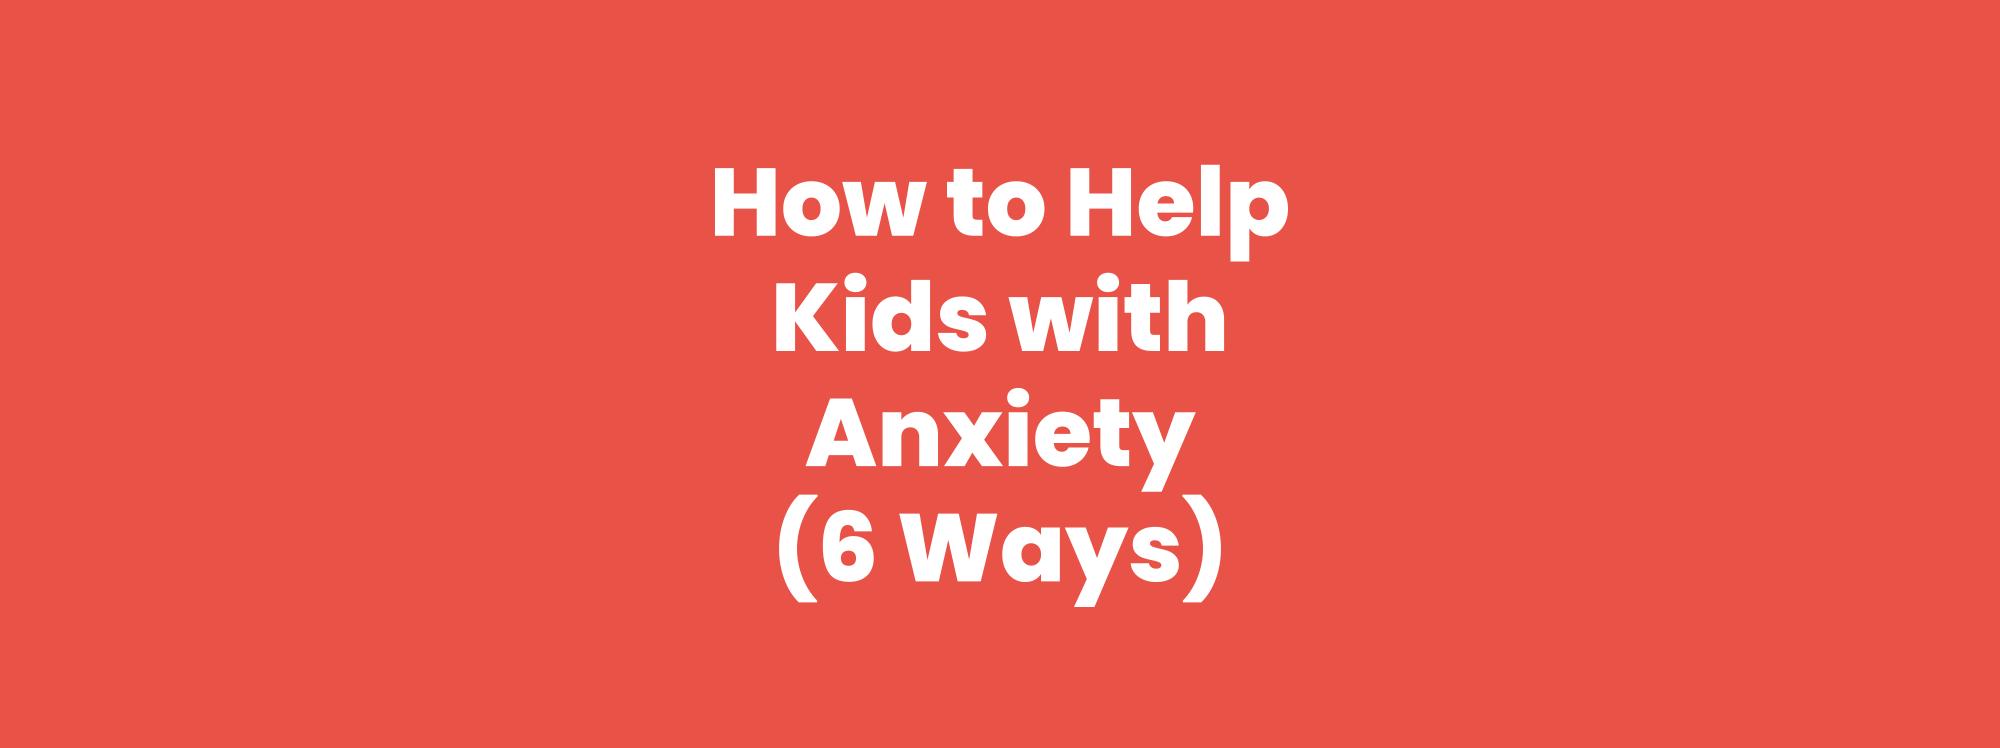 How To Help Kids with Anxiety (6 Ways)| Calm Caterpillar